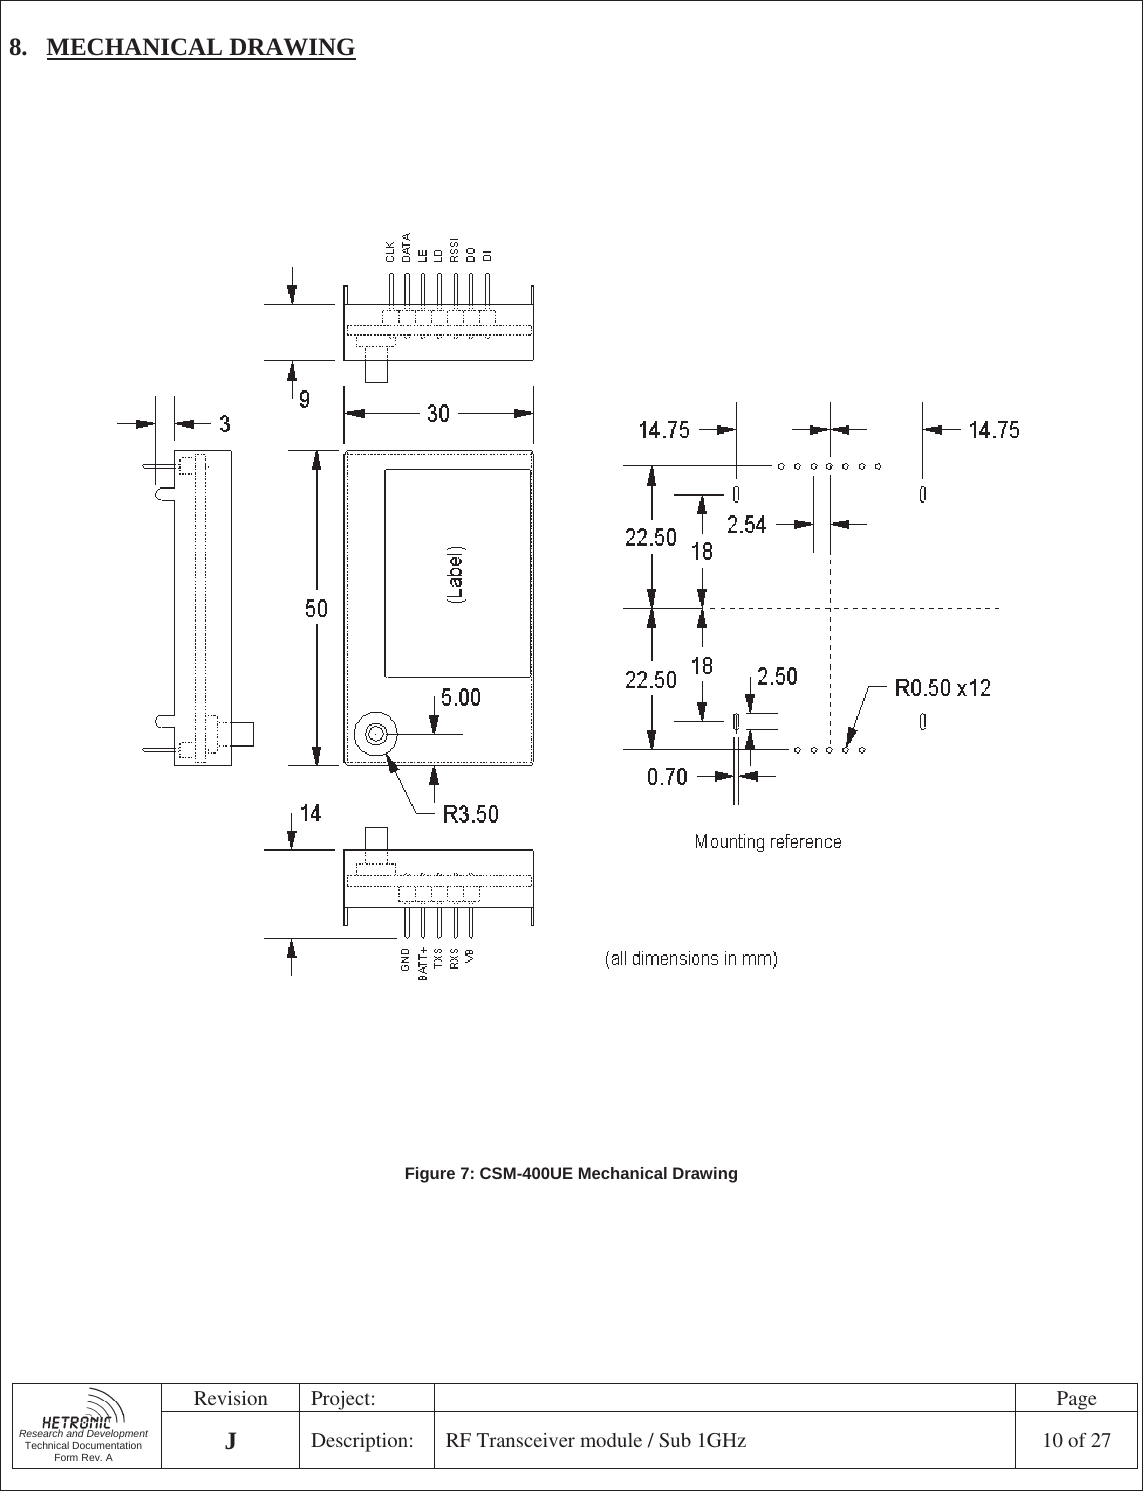   Research and Development Technical Documentation Form Rev. A Revision Project:    Page JDescription:  RF Transceiver module / Sub 1GHz  10 of 27  8. MECHANICAL DRAWING   Figure 7: CSM-400UE Mechanical Drawing       